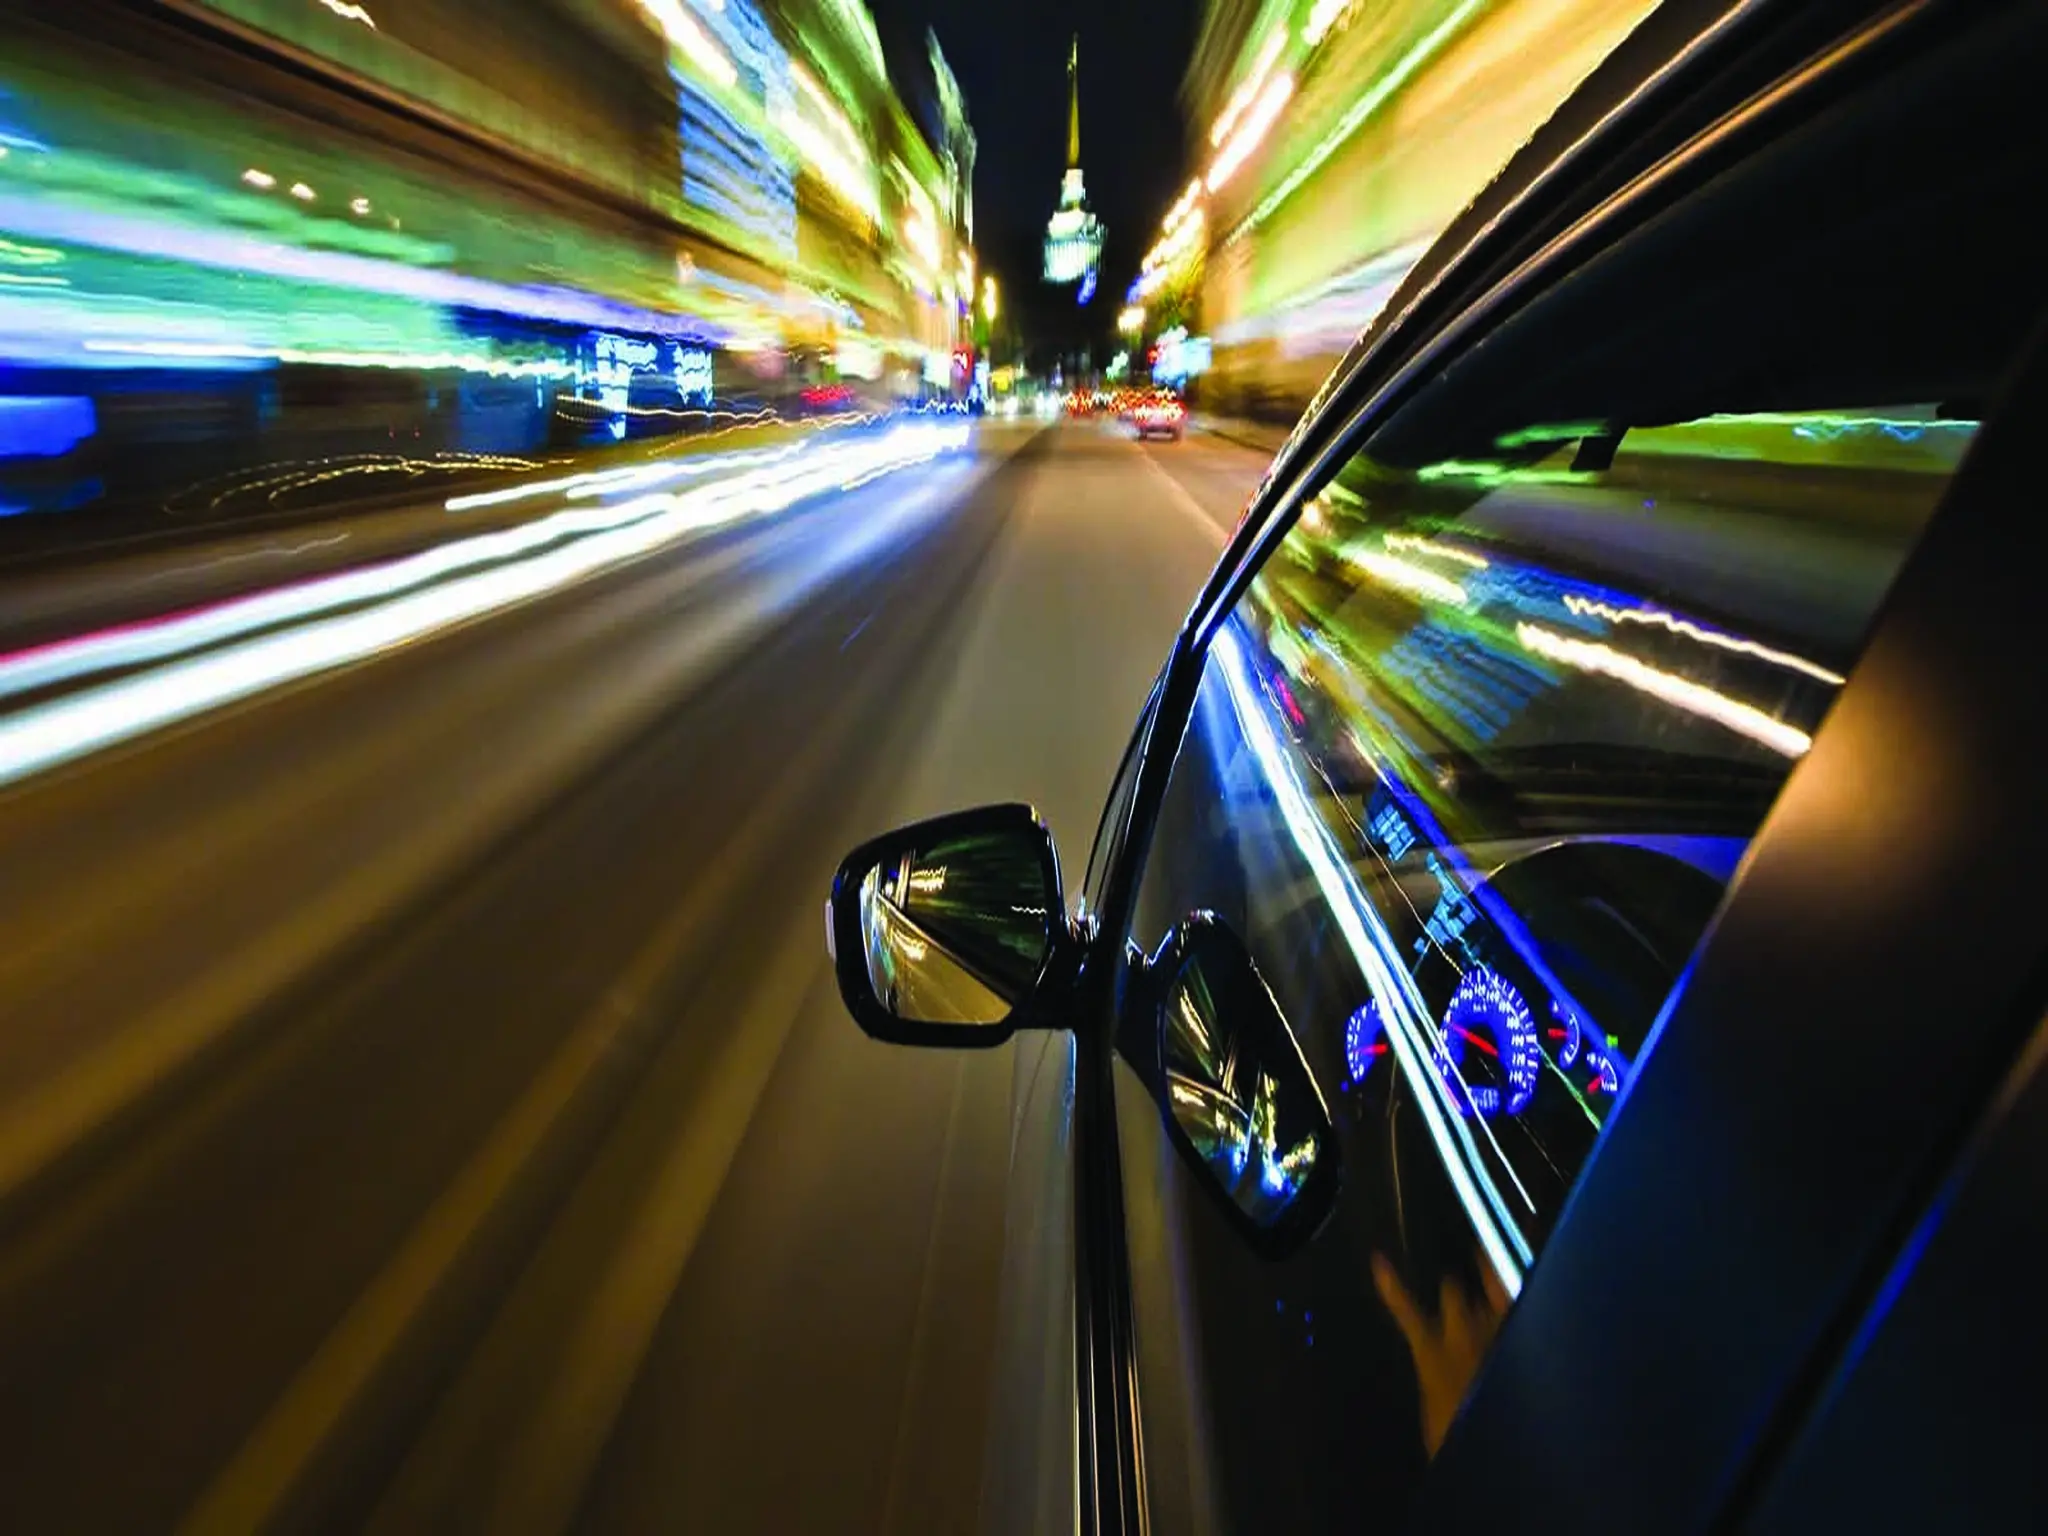 The UAE announces the imposition of new fines for reckless driving violations up to Dh20,000